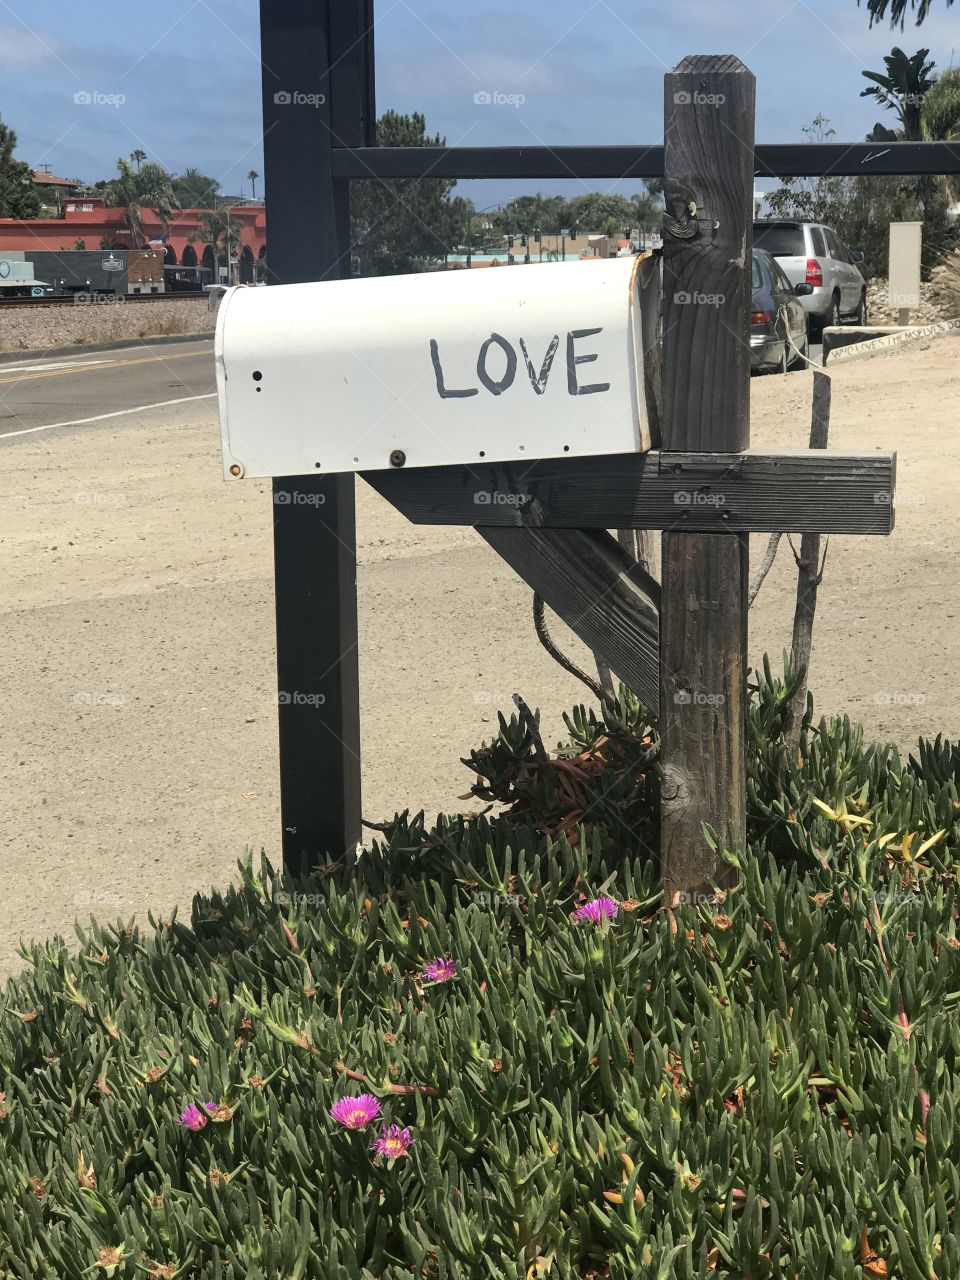 Sending some mail and notes of love to loved ones 